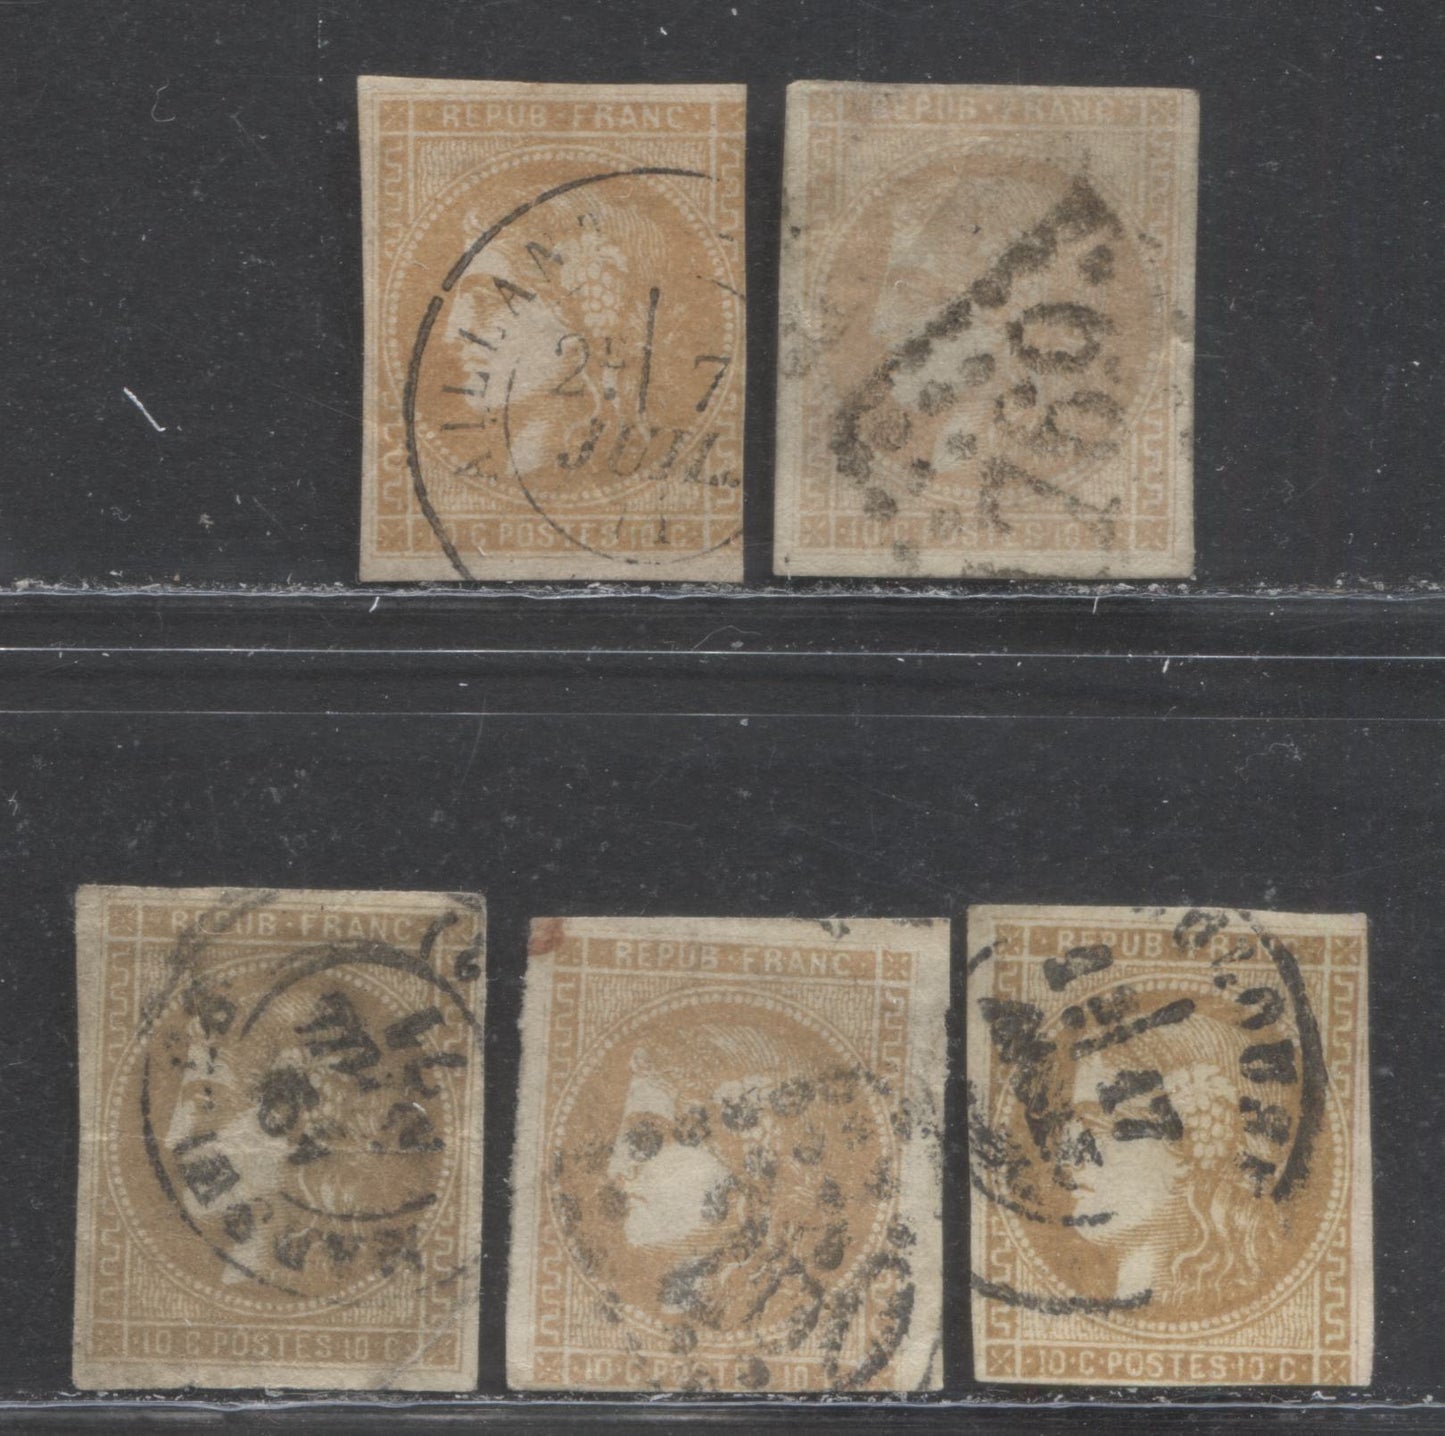 Lot 372 France SC#42a Bistre, Type B 1870-1871 Imperf Bordeaux Definitive Issue, An Ungraded Shade Lot of 5 Examples, 2022 Scott Classic Cat. $450 USD, Net Est. $25, Click on Listing to See ALL Pictures